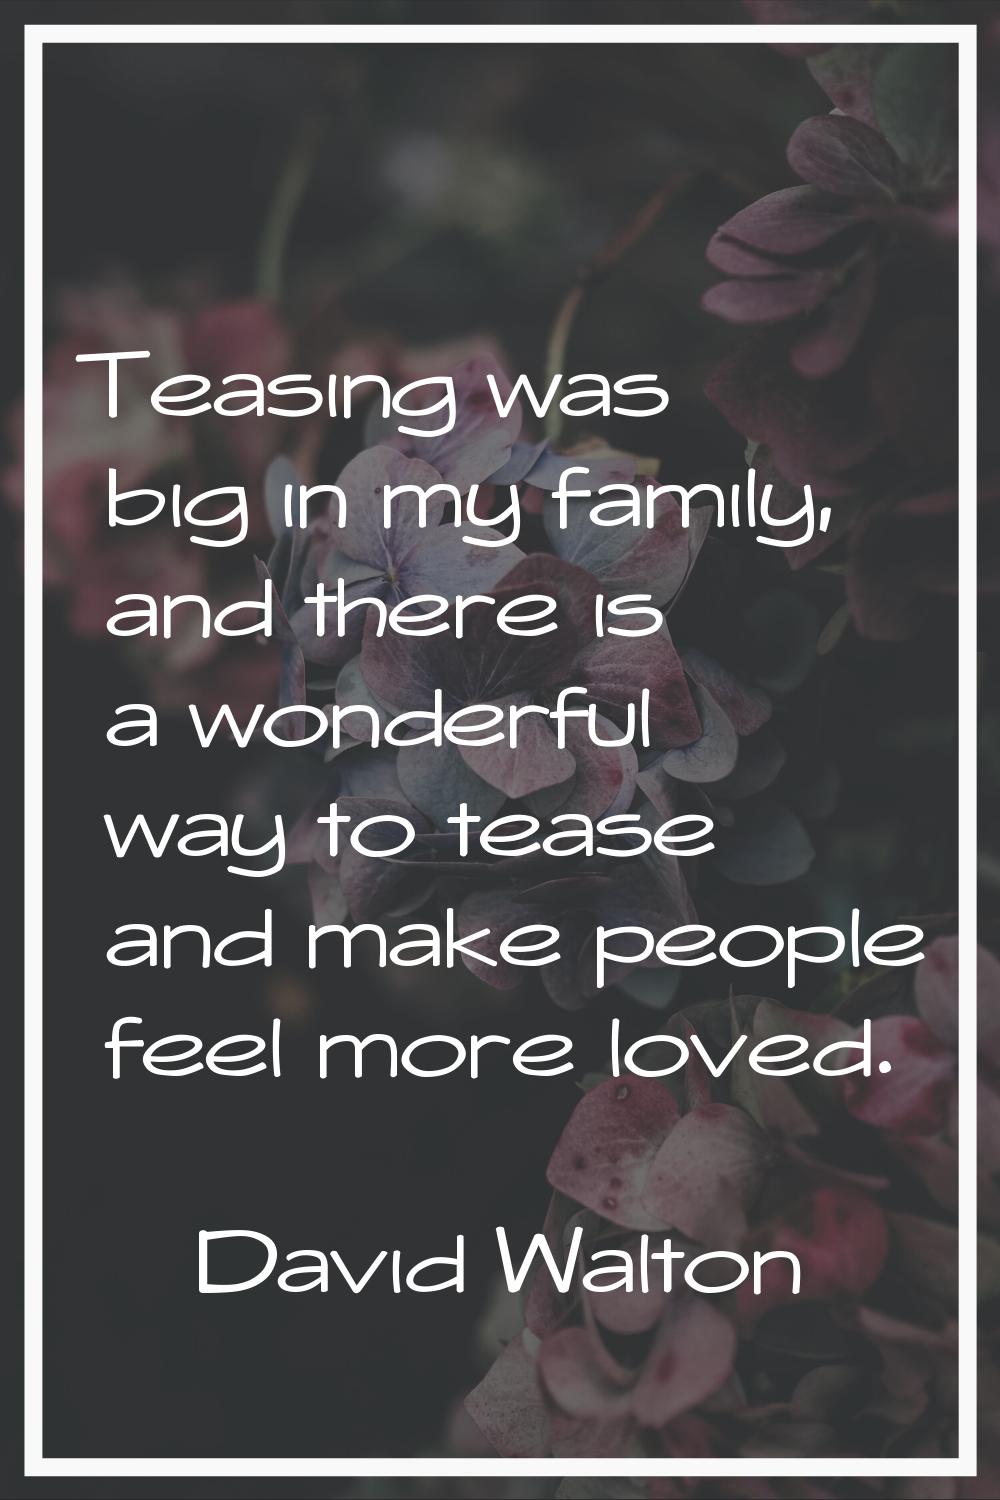 Teasing was big in my family, and there is a wonderful way to tease and make people feel more loved